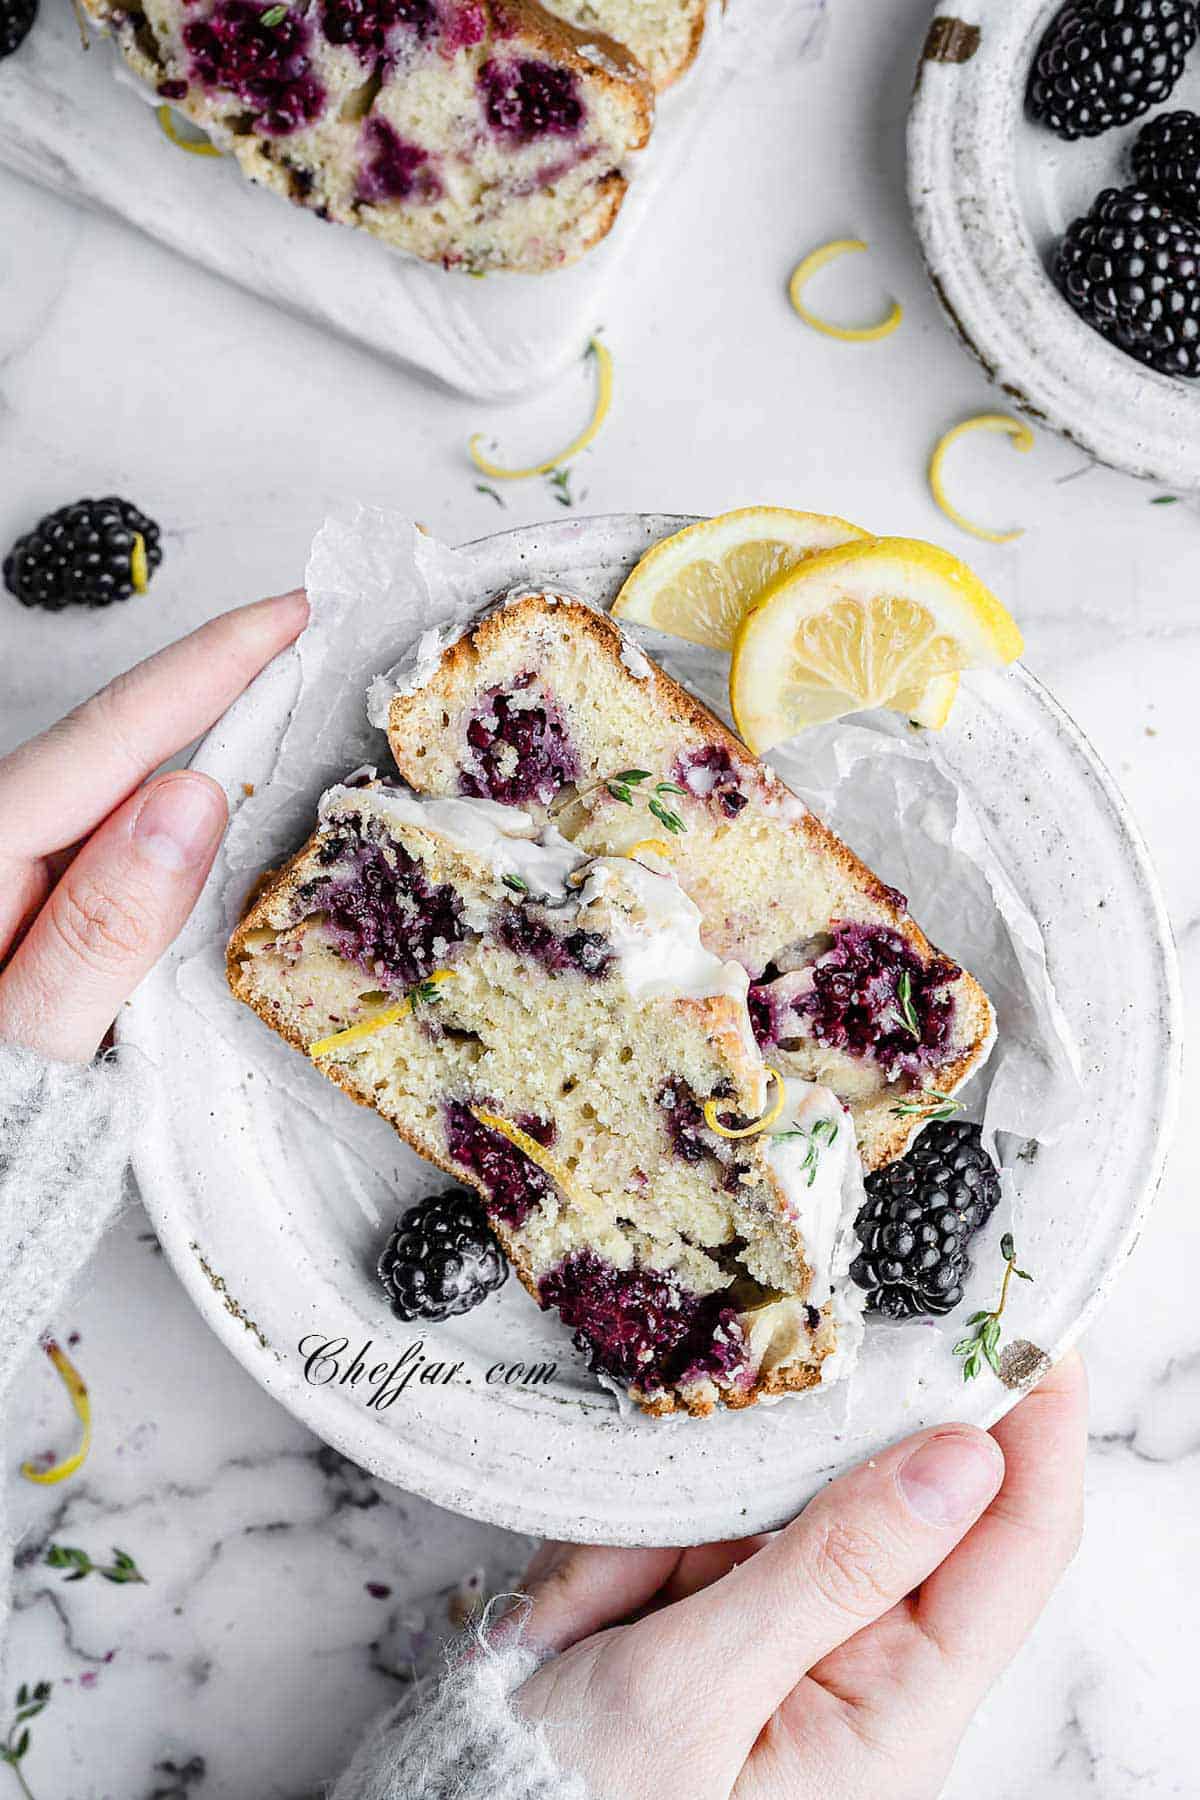 hands holding a plate with two slices of lemon blackberry bread